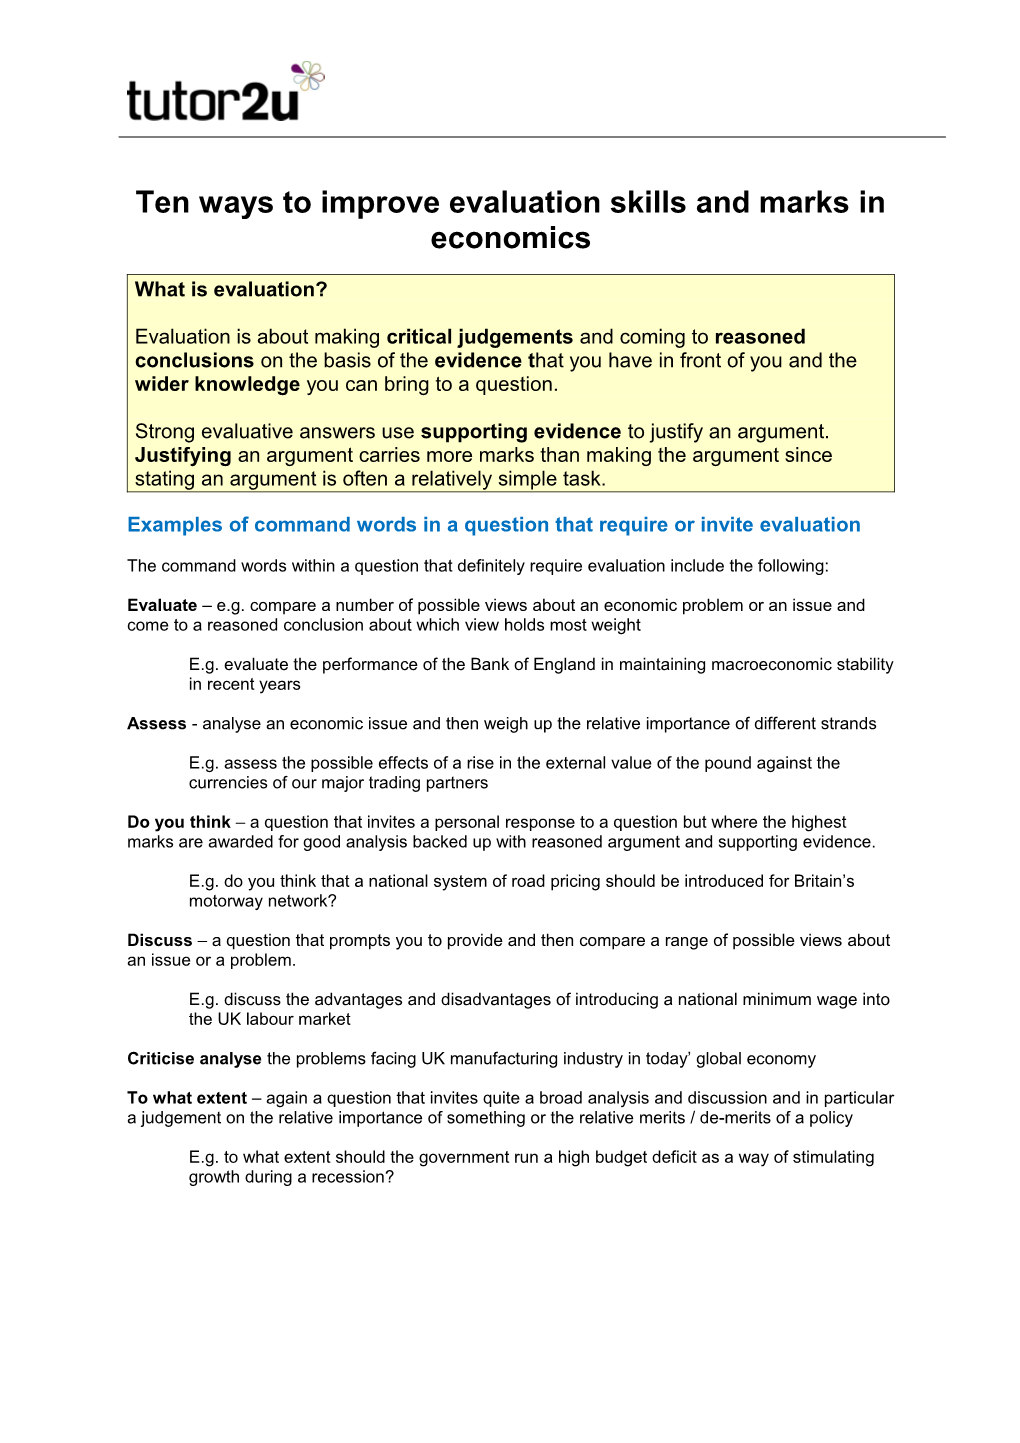 Ten Ways to Improve Your Evaluation Skills and Marks for A2 Economics